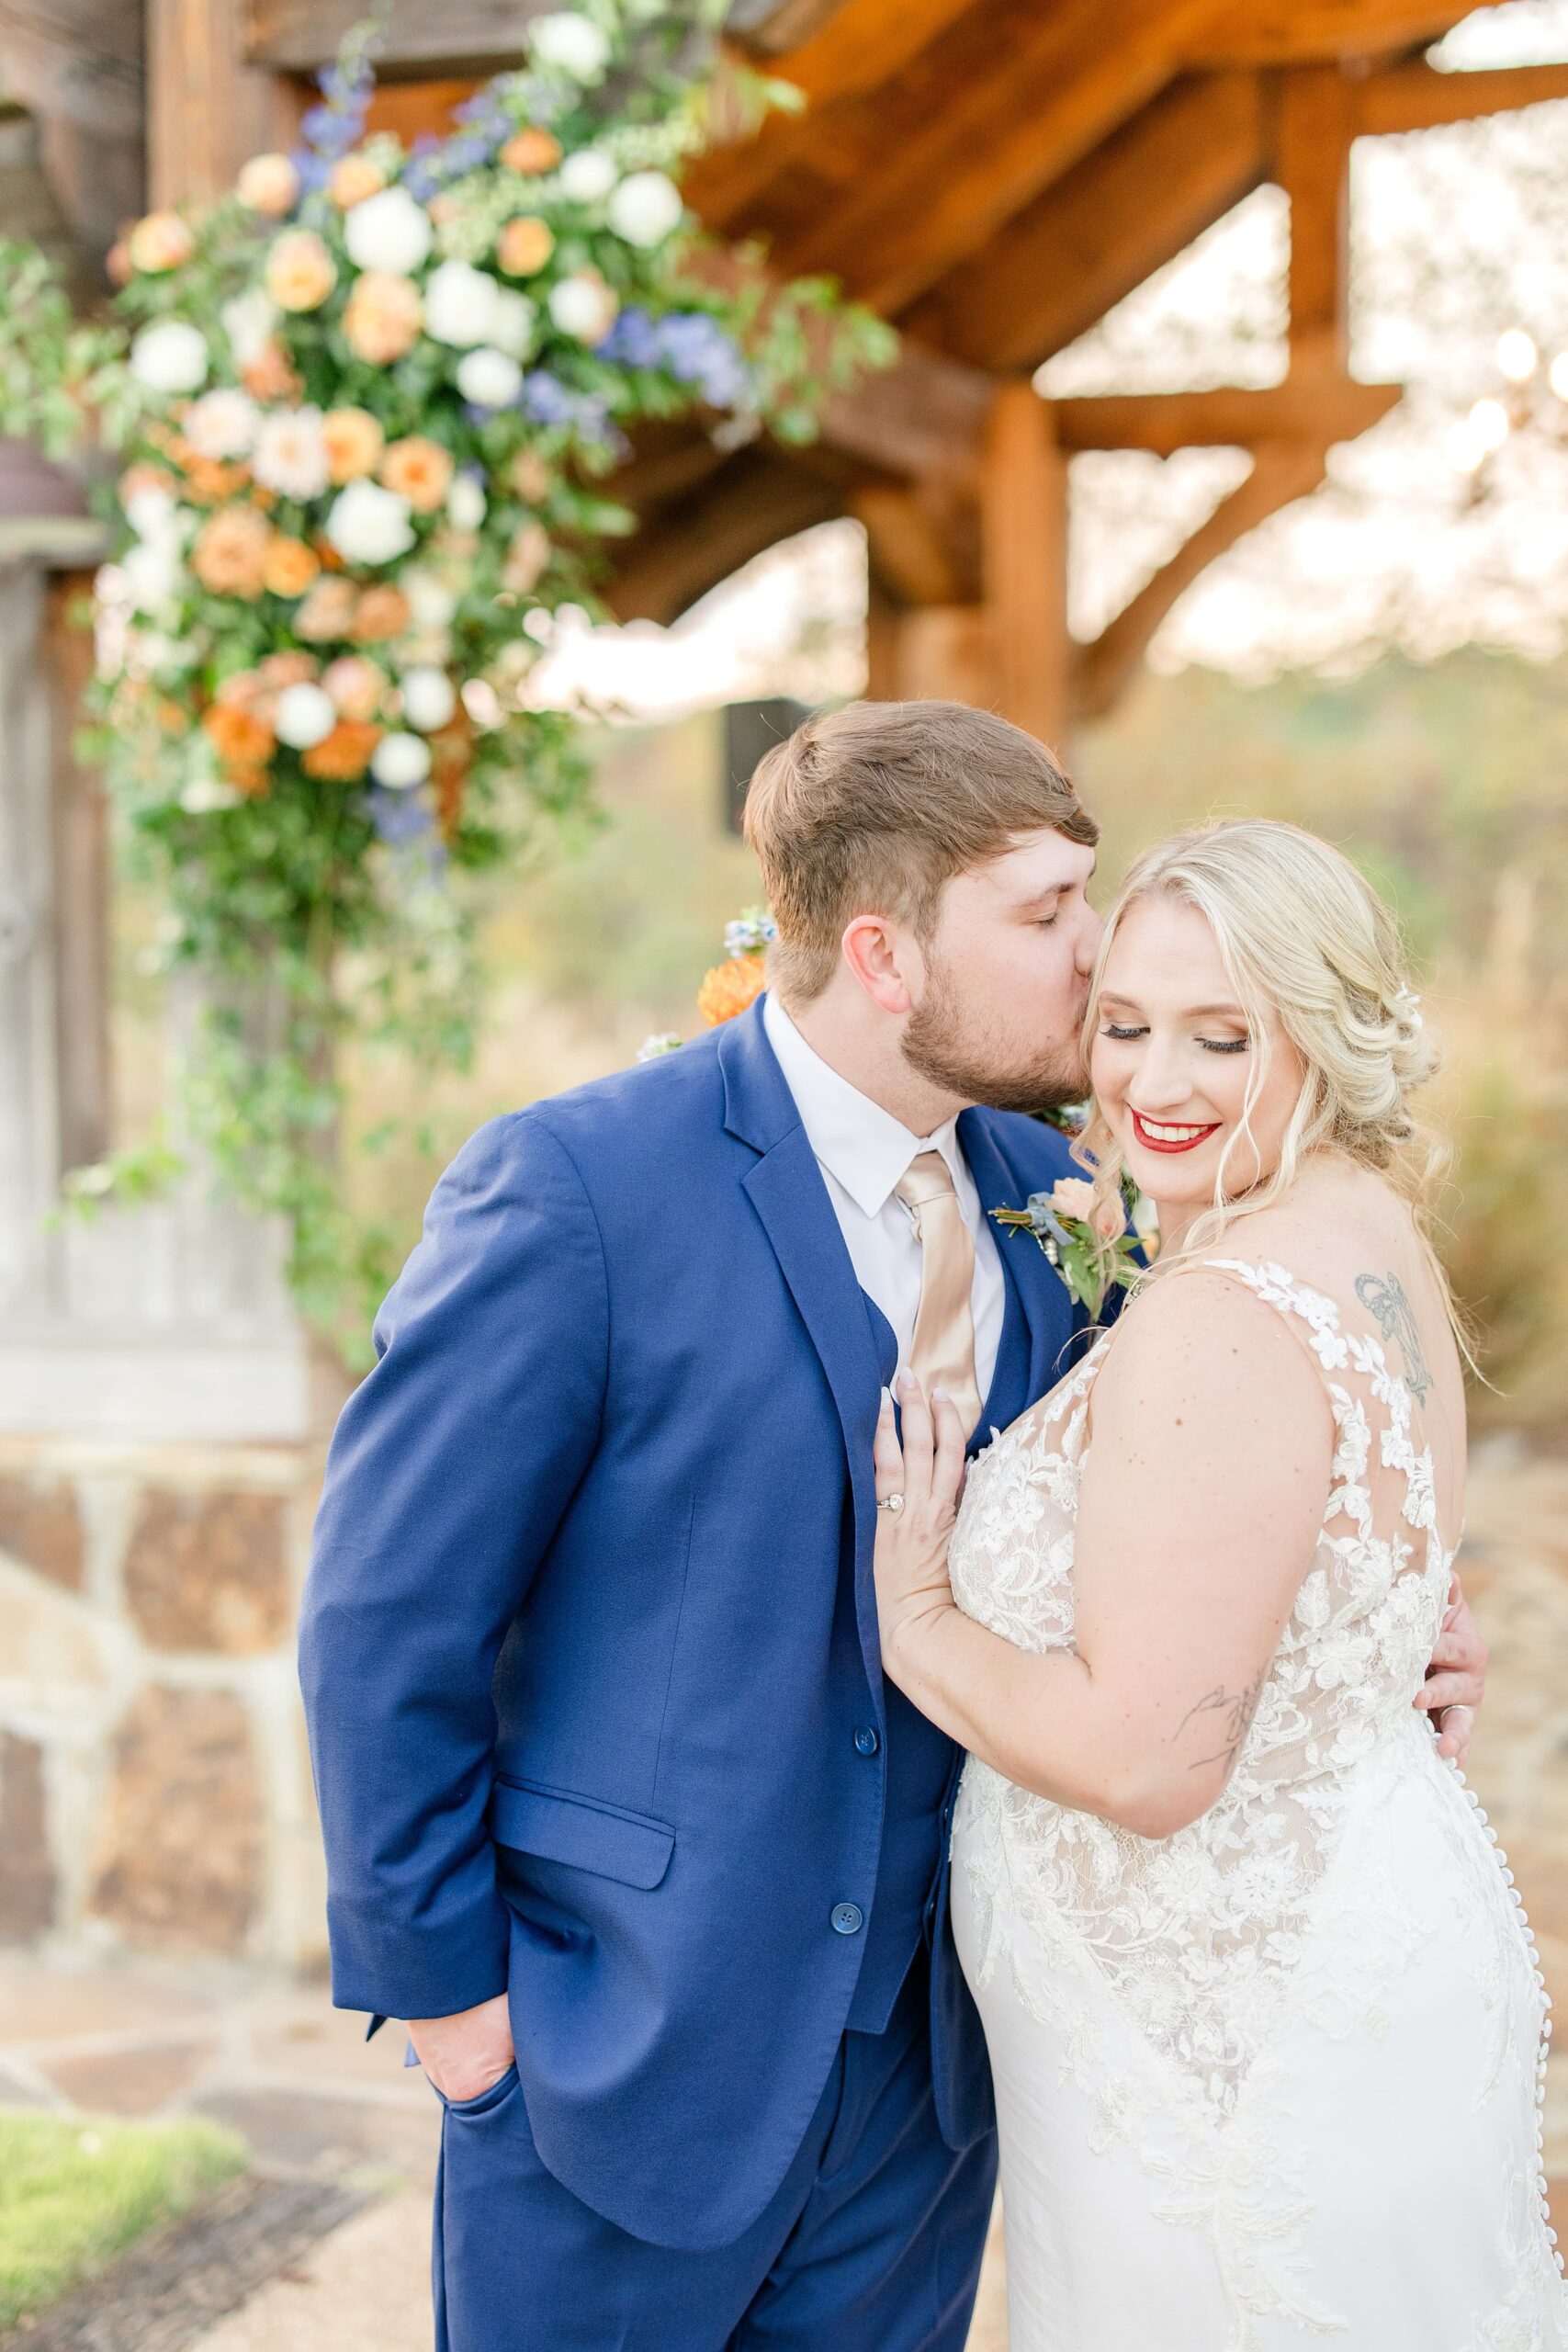 Otter_Creek_Farmstead_and_distillery_fall_wedding_birmingham_alabama_wedding_photographers_and_videographers_katie_and_alec_photography